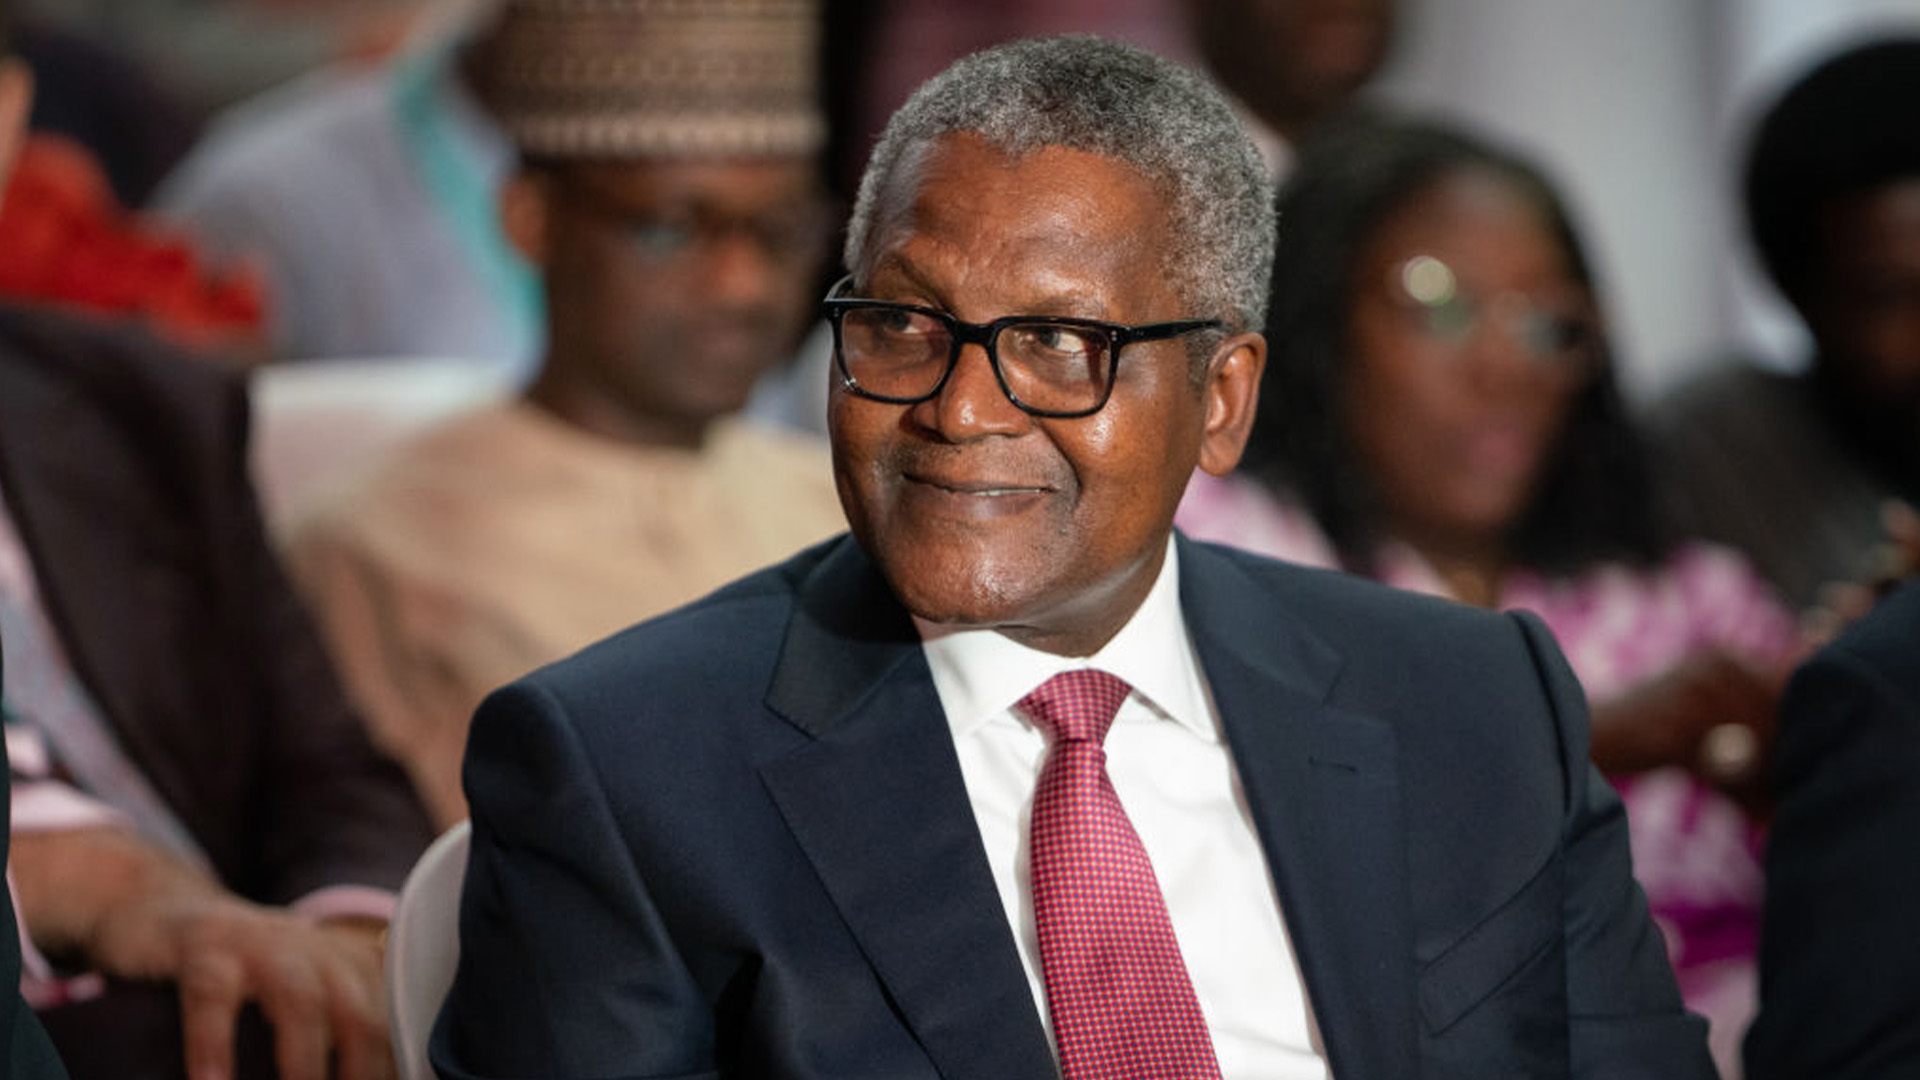 Africa's Richest Person Opened $19 Billion Oil Refinery To Help Nigeria